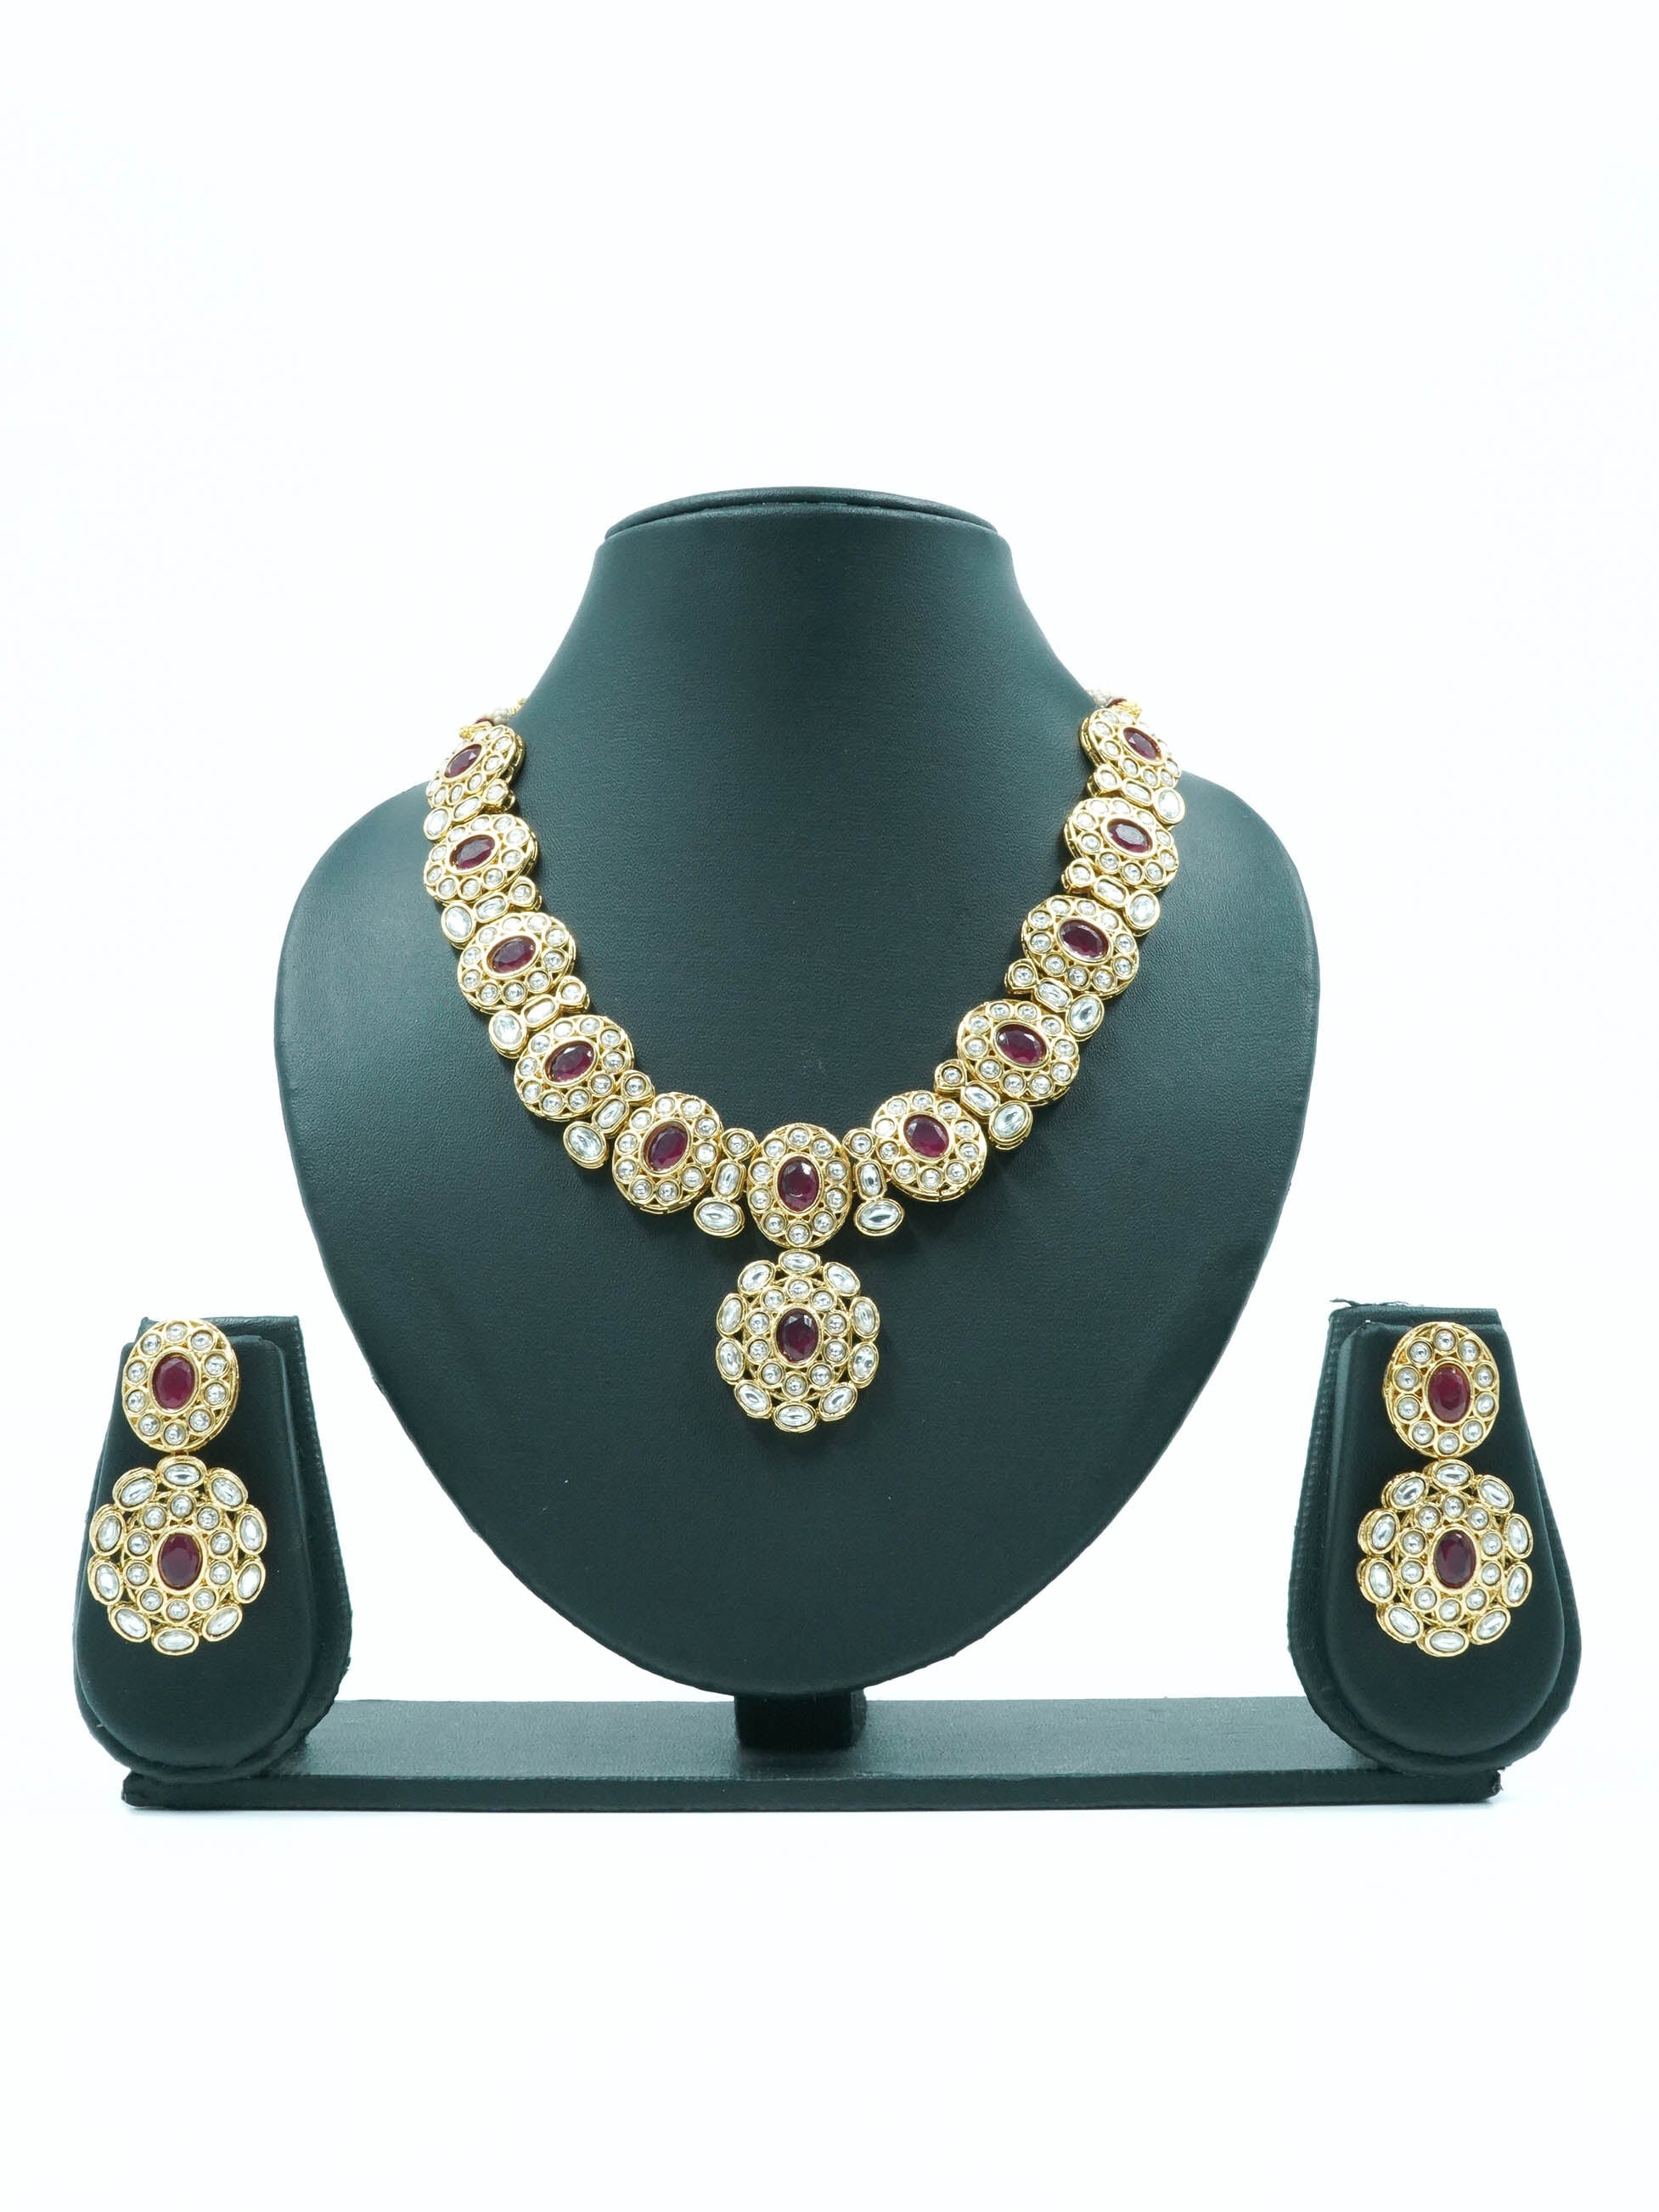 Premium Gold Polki Necklace Set with Colour Options 12579N